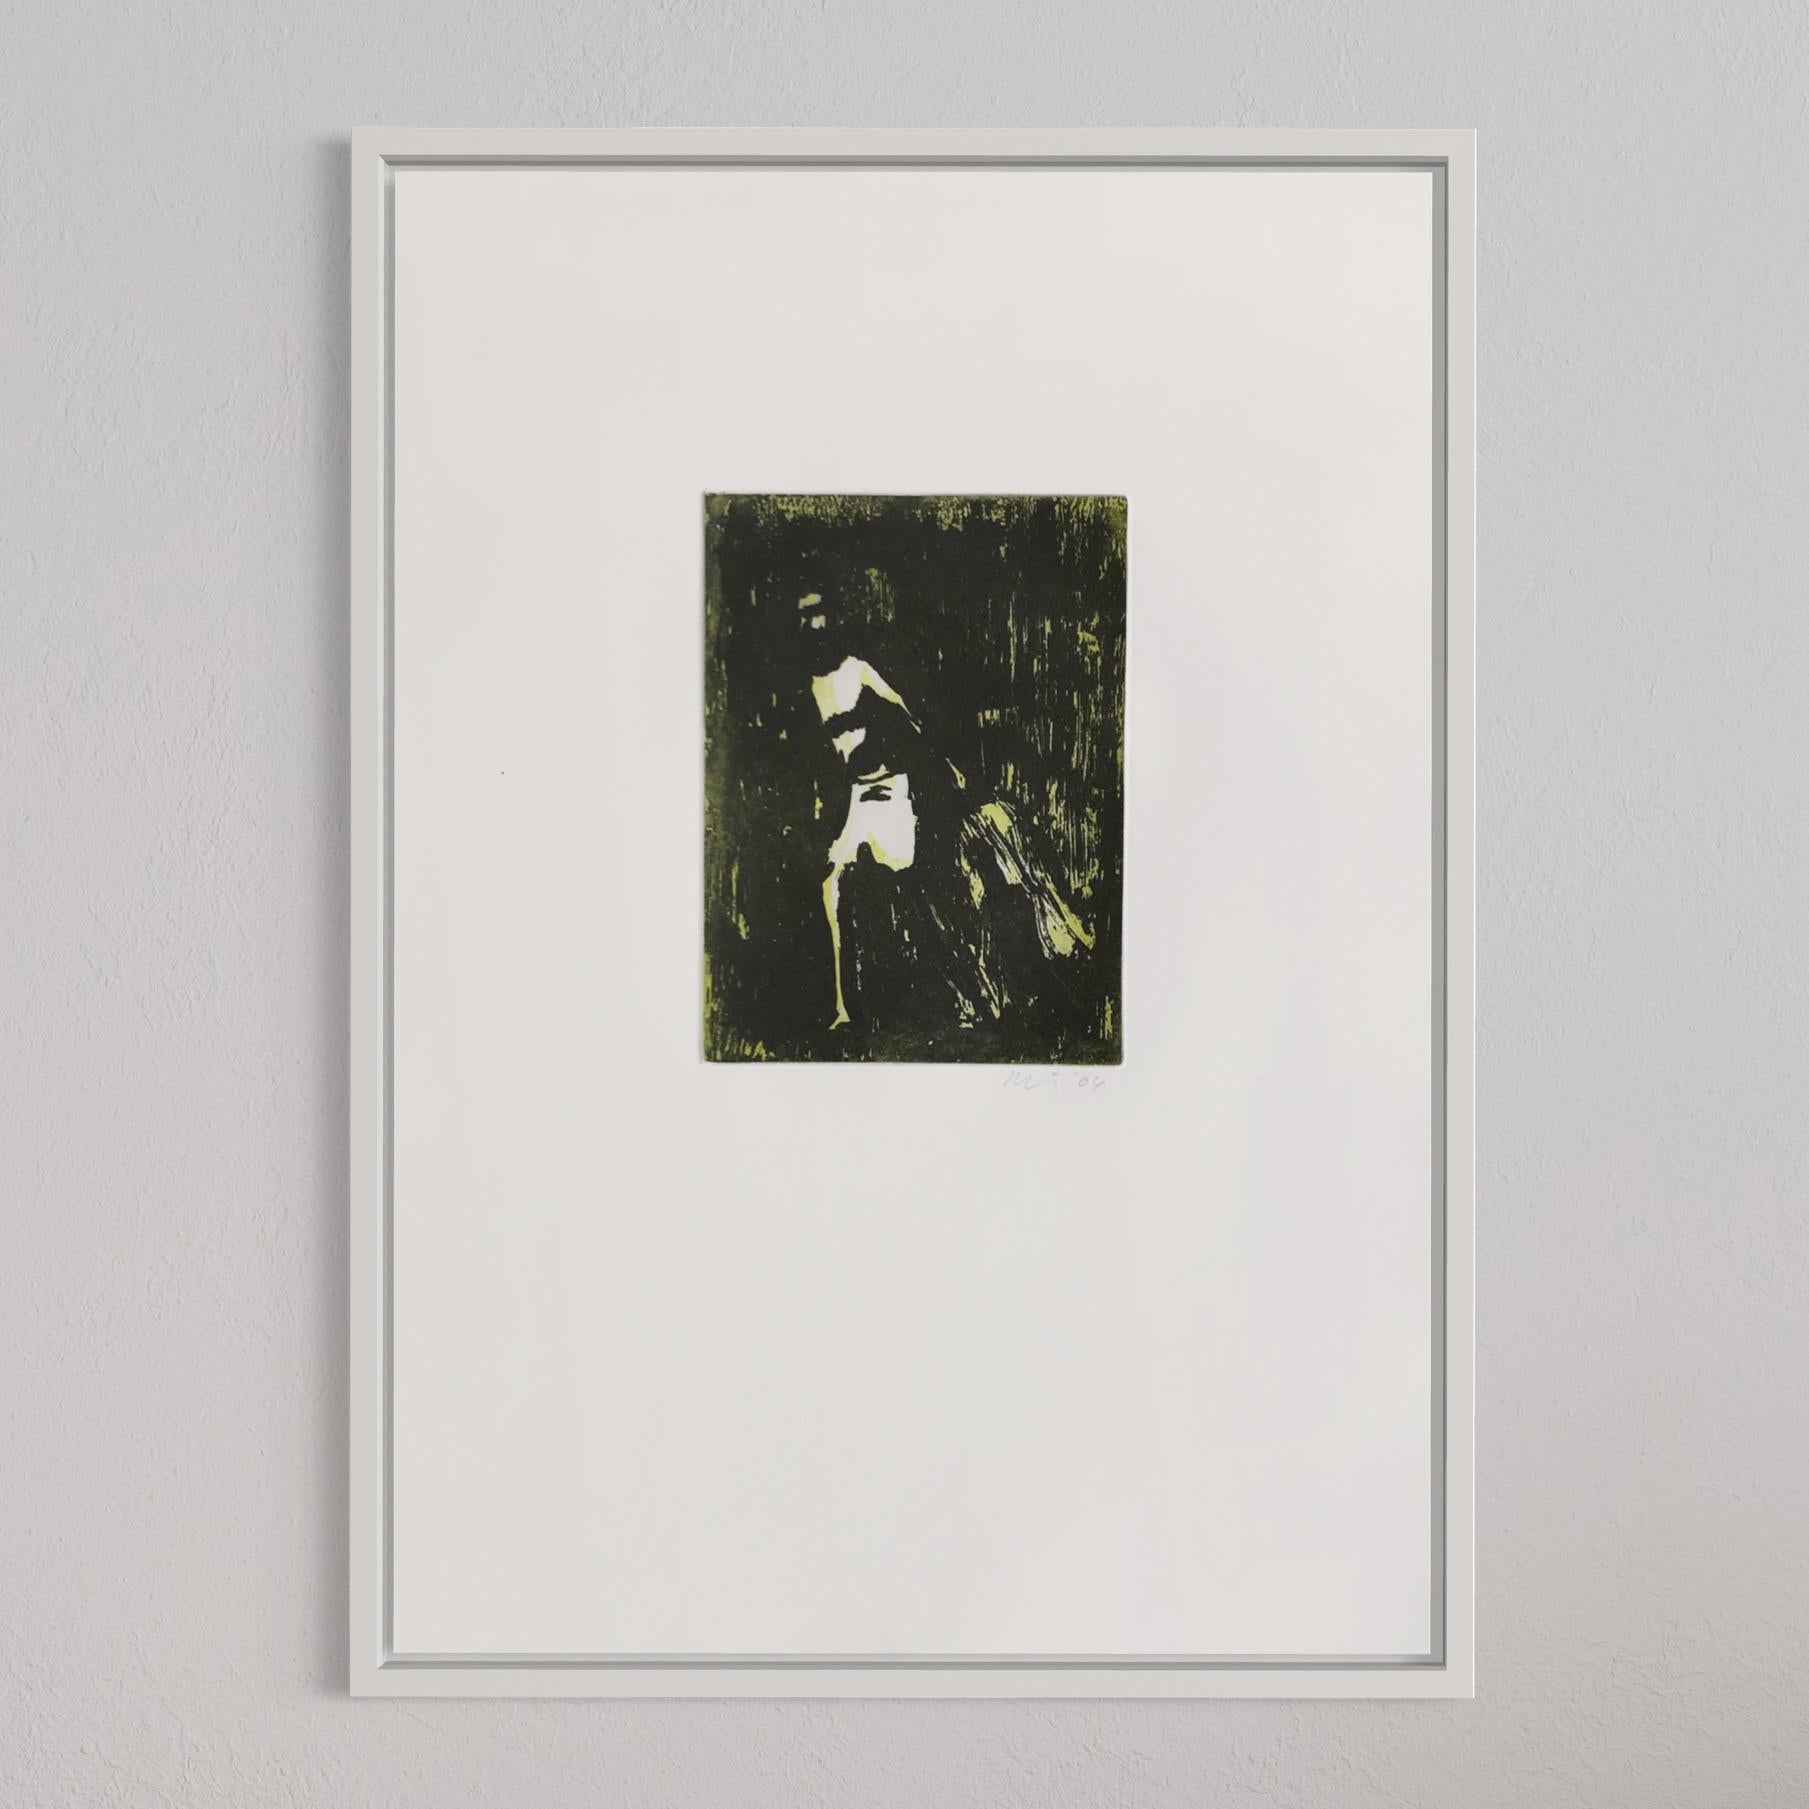 Peter Doig, Fisherman (from Black Palms) - 2004, Etching, Signed Print